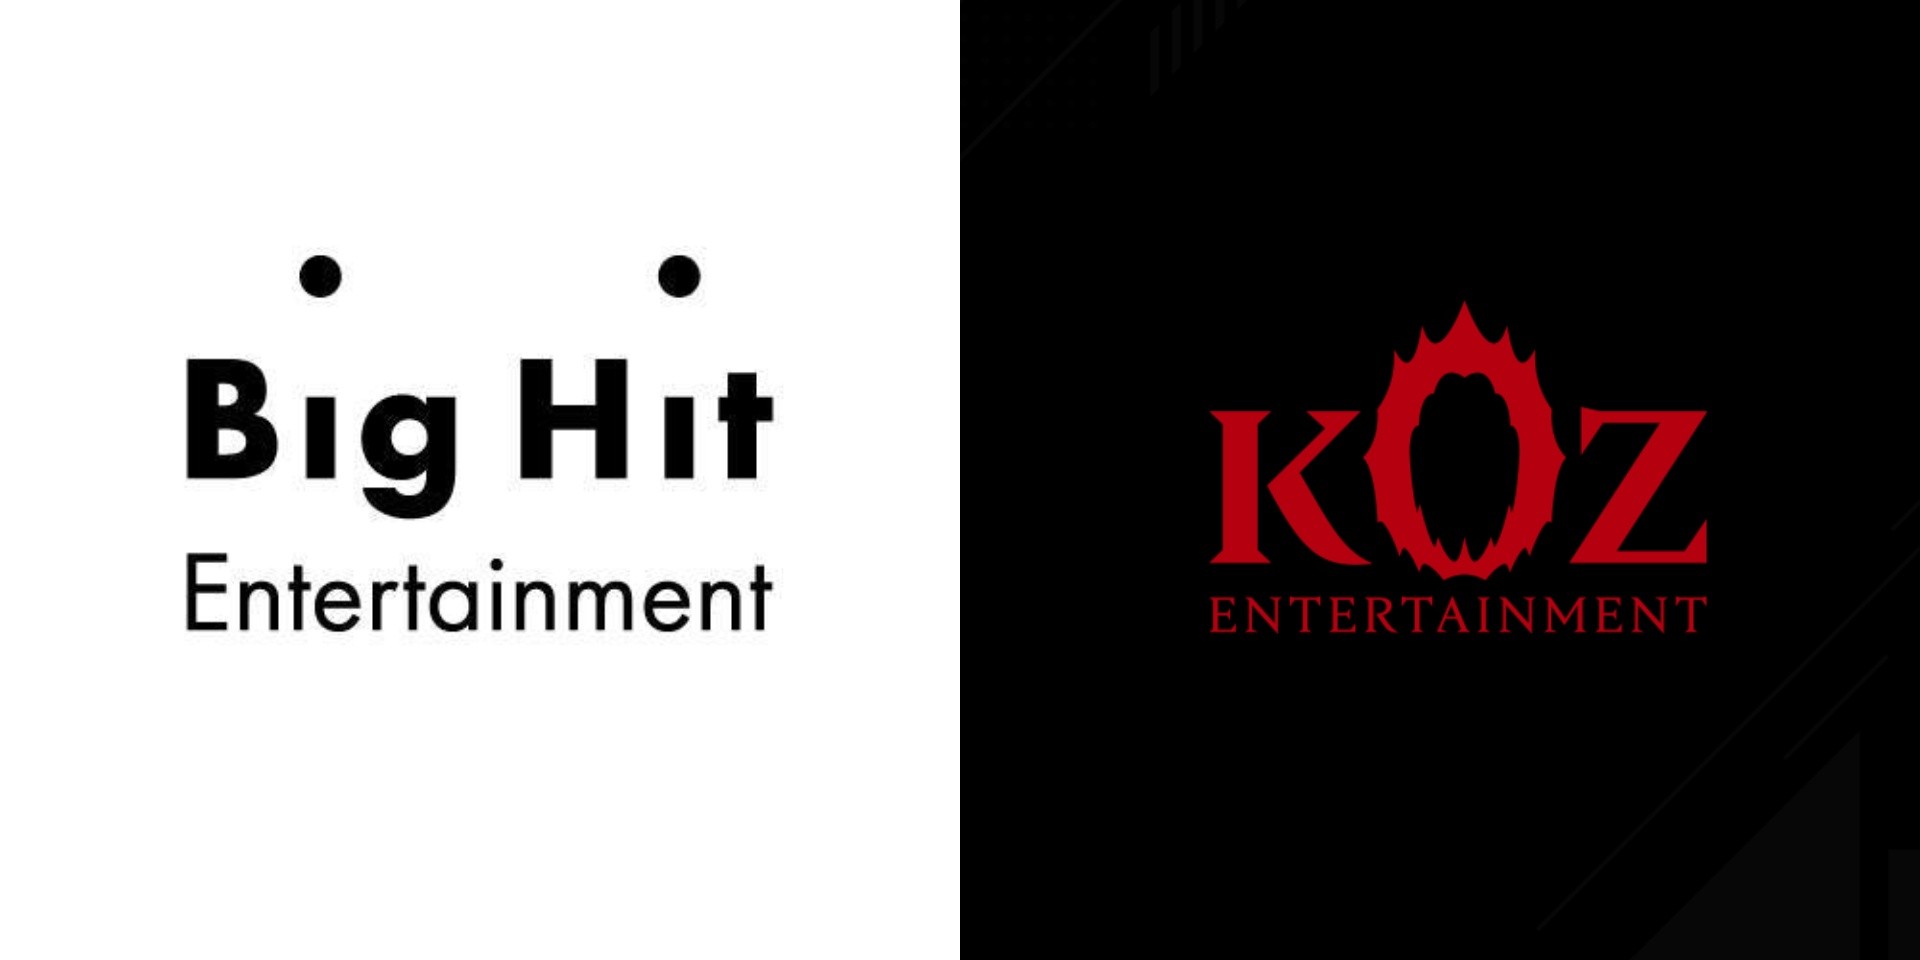 Big Hit Entertainment is acquiring KOZ Entertainment, a hip-hop label founded by Block B’s Zico